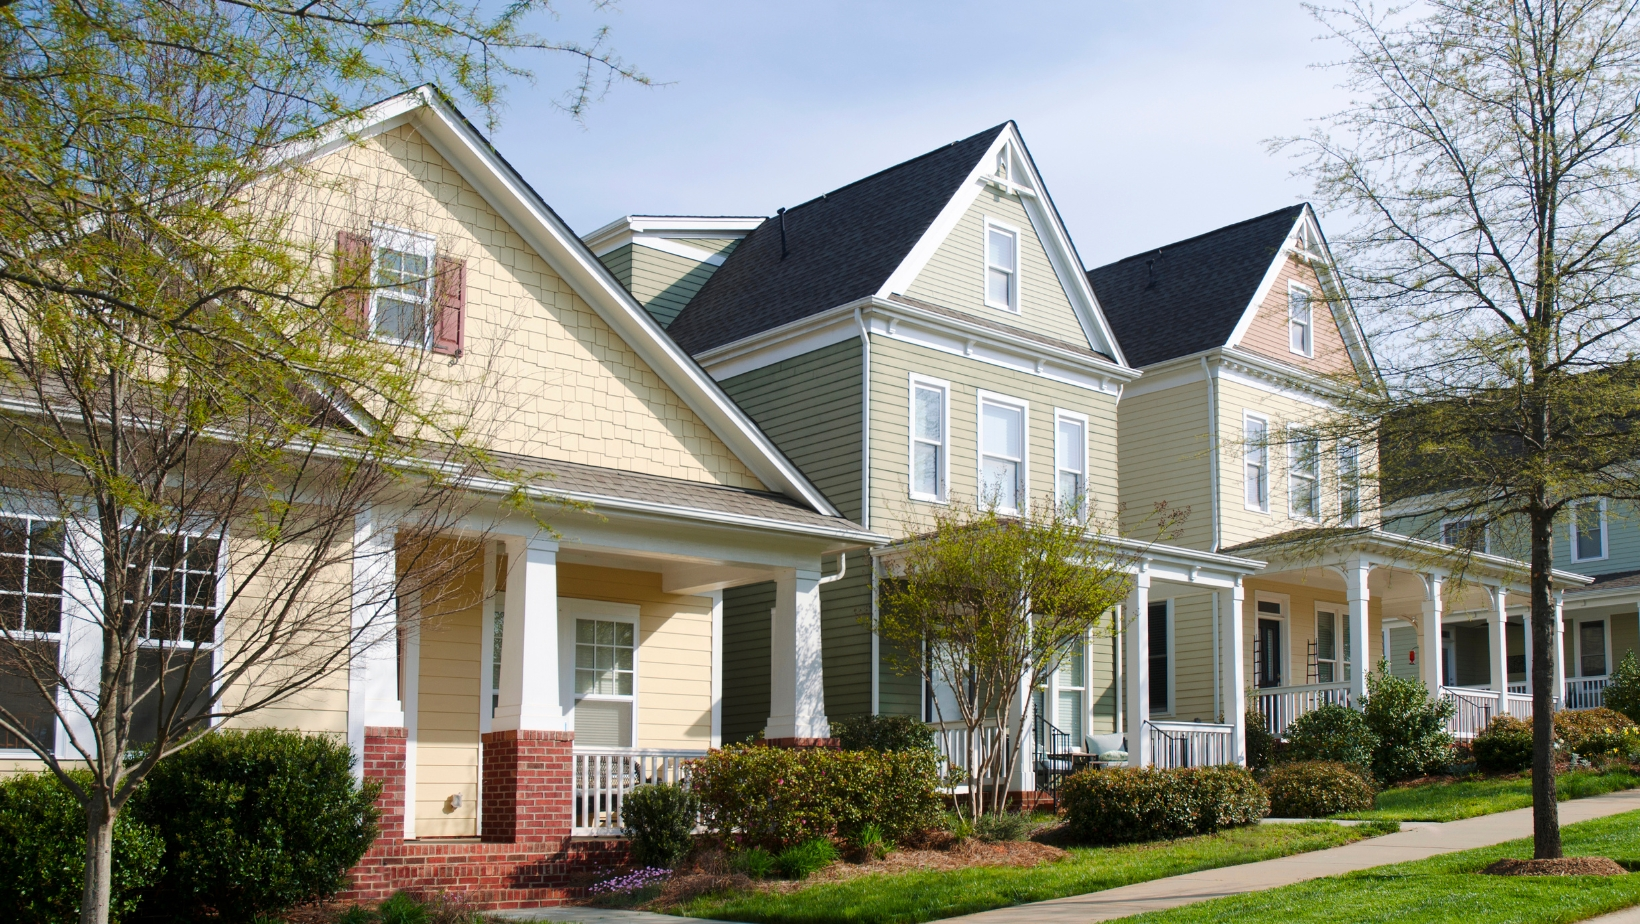 Your hoa community uses governing documents to enforce hoa rules and levy fines.